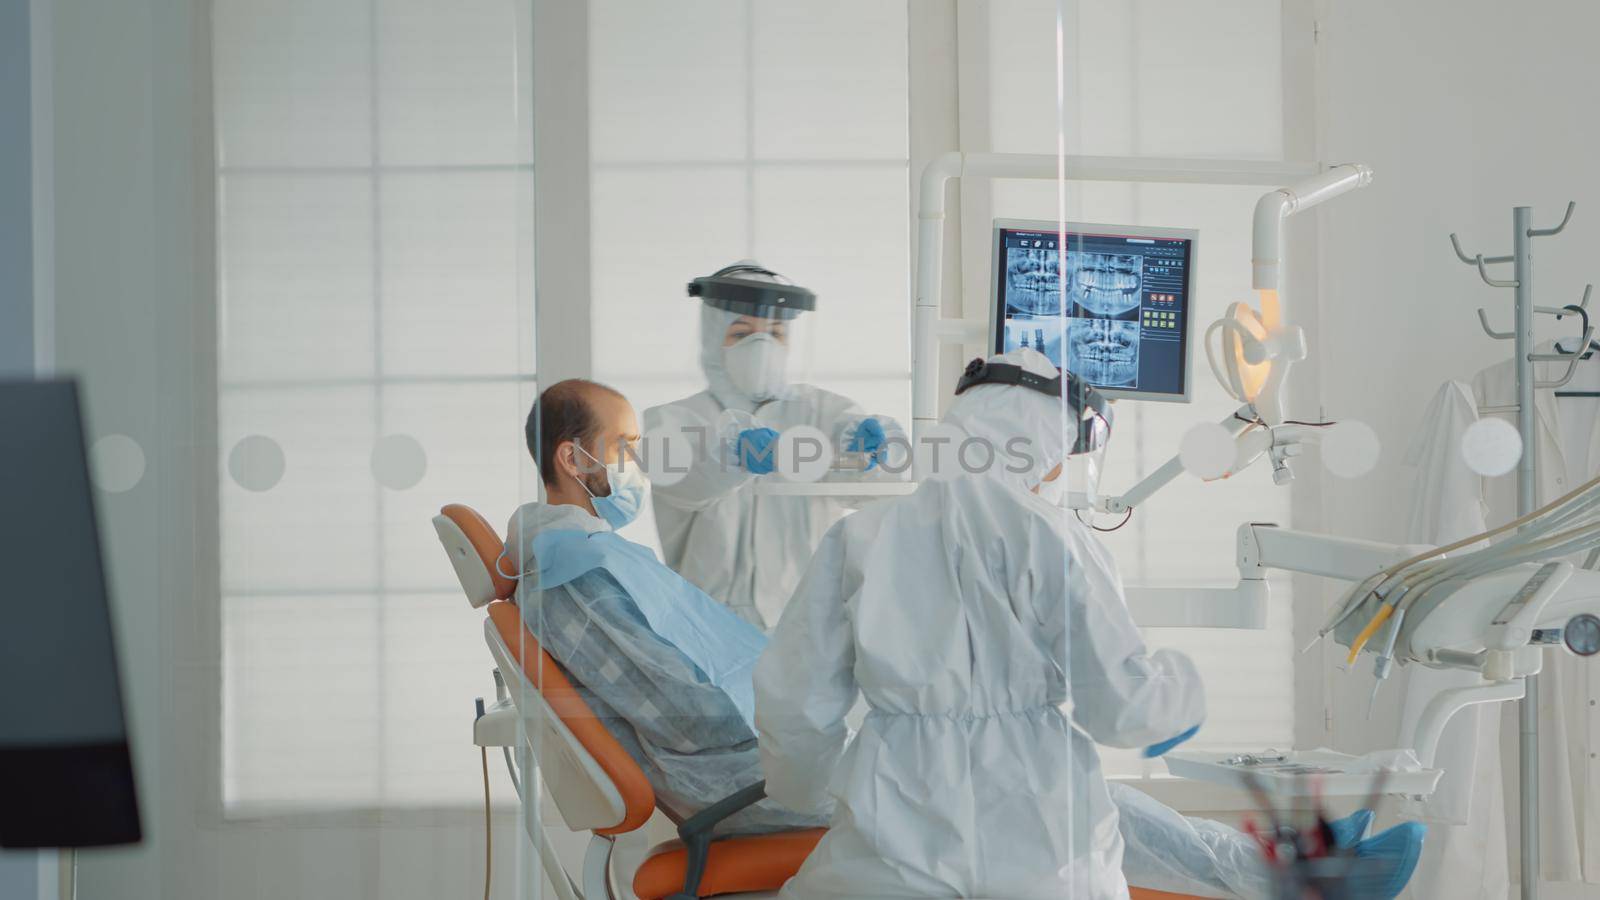 Team of dentists and patient sitting in dental cabinet by DCStudio